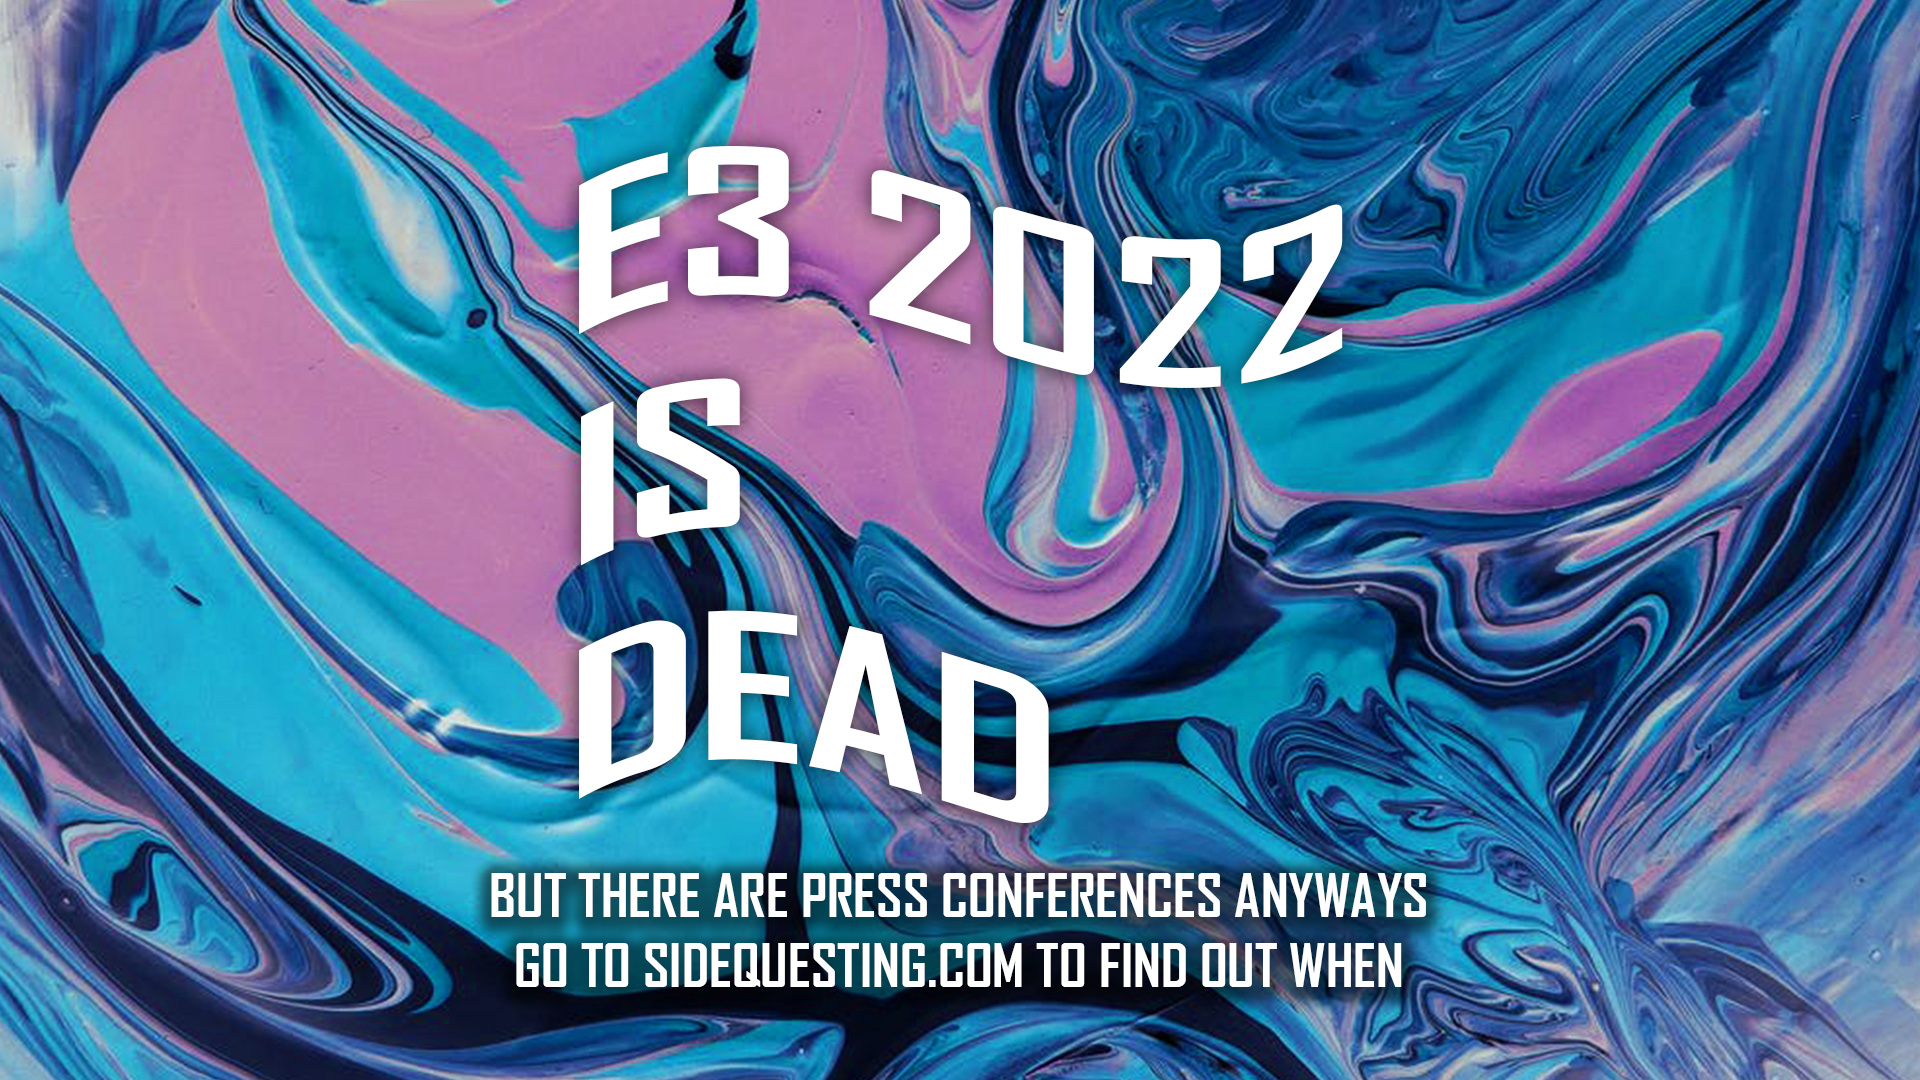 The BIG E3 2022 Party List: Your guide to after parties, concerts, events and more!